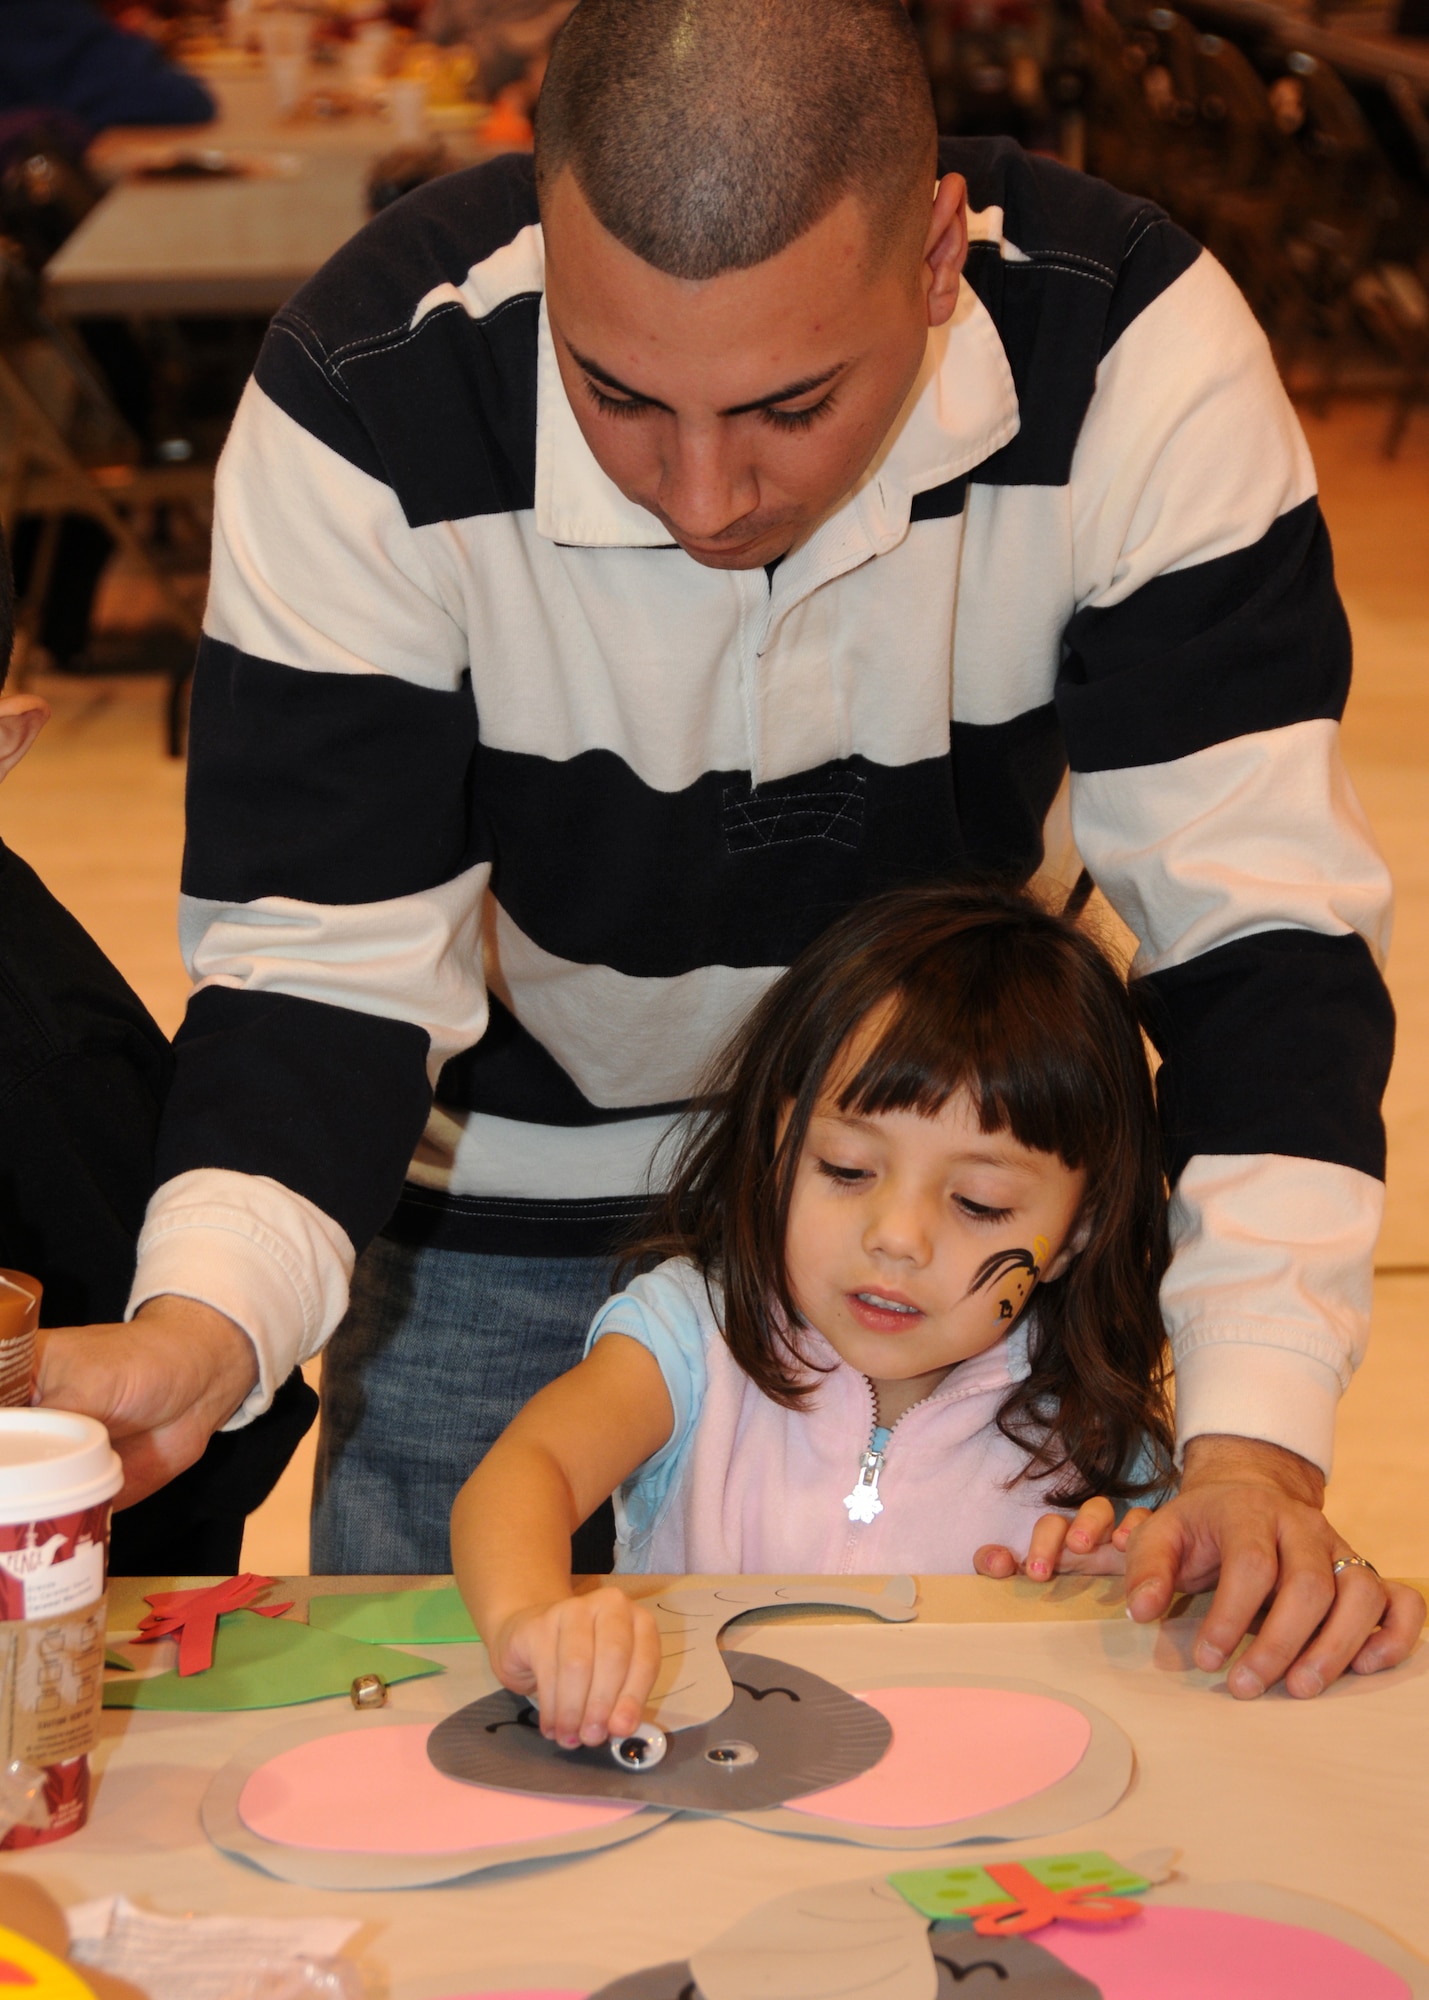 Tech. Sgt. Anthony Valdez, 151st Communications Flight, and his daughter Evangelina, make crafts during the Utah Air National Guard?s annual Children's Christmas Party on December 12. The event included a variety of children?s activities, including face painting, crafts and performing clowns. U.S. Air Force Photo by: Staff Sgt. Emily Monson (RELEASED)